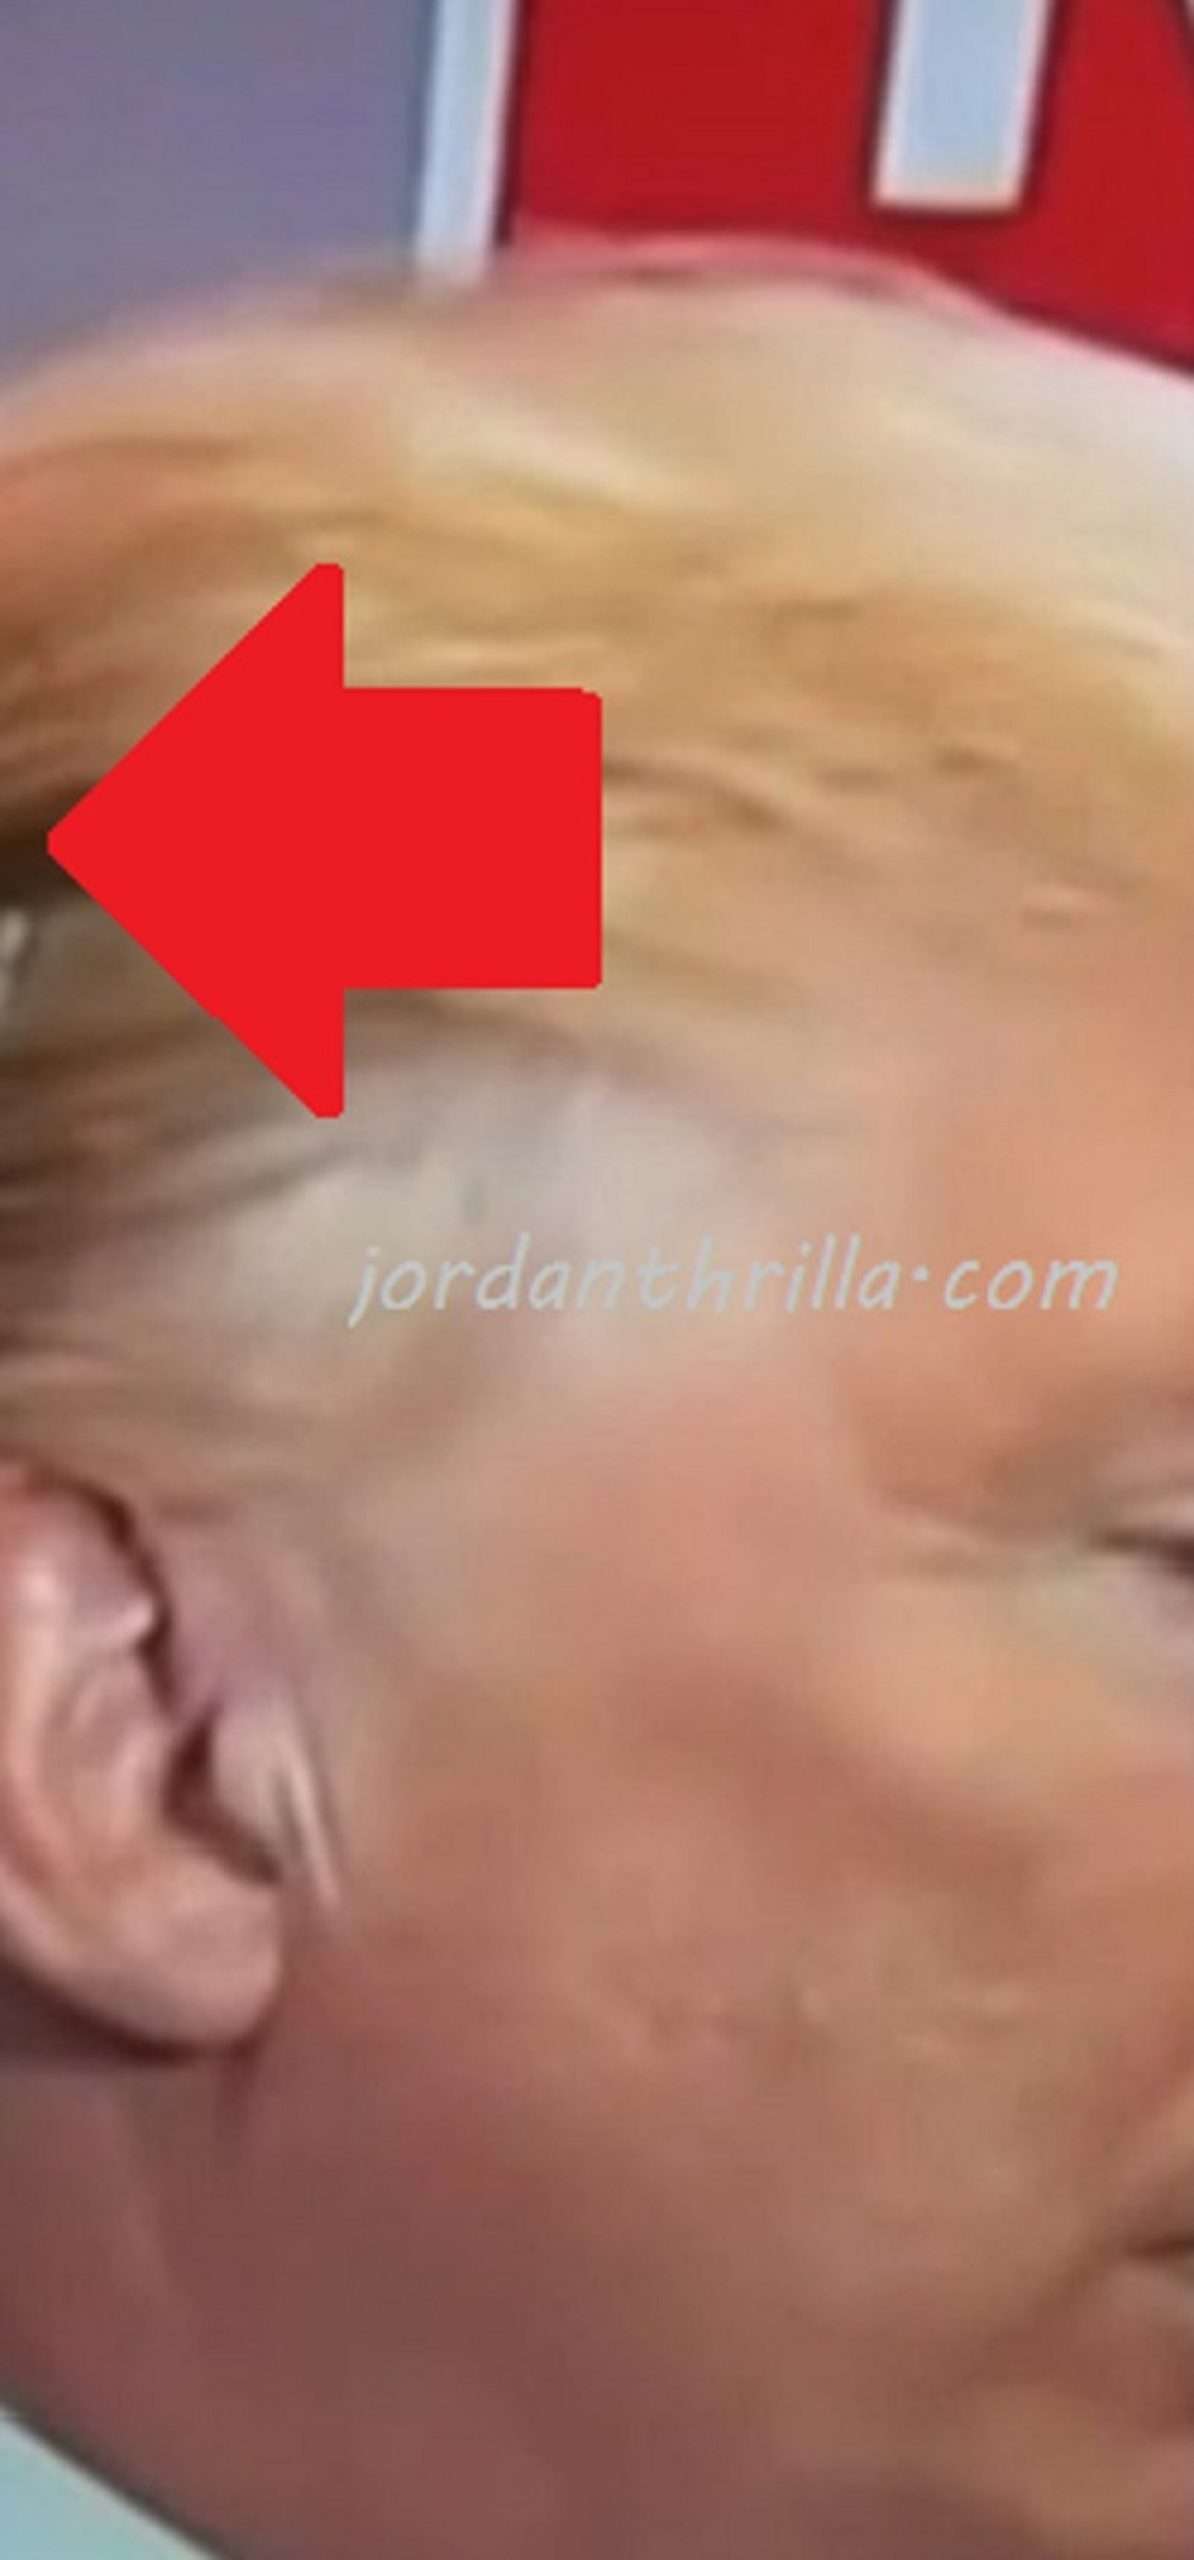 The Donald Trump Clone Conspiracy Theory Emerges After Strange Silver Patch Seen on Trump's Scalp